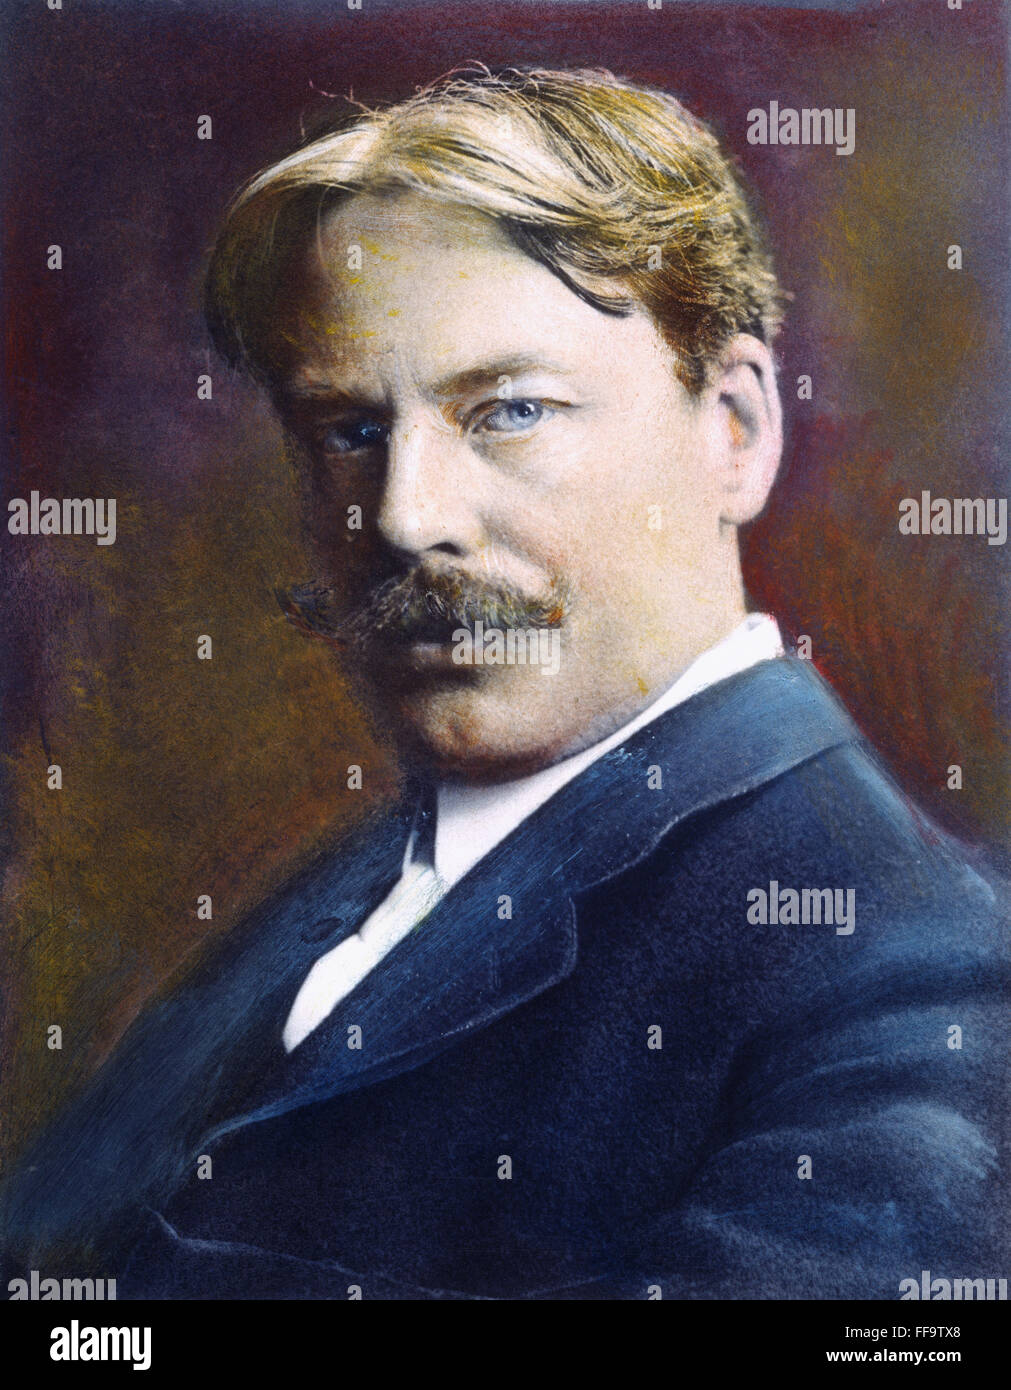 EDWARD ALEXANDER MacDOWELL /n(1861-1908). American composer. Oil over a photograph. Stock Photo